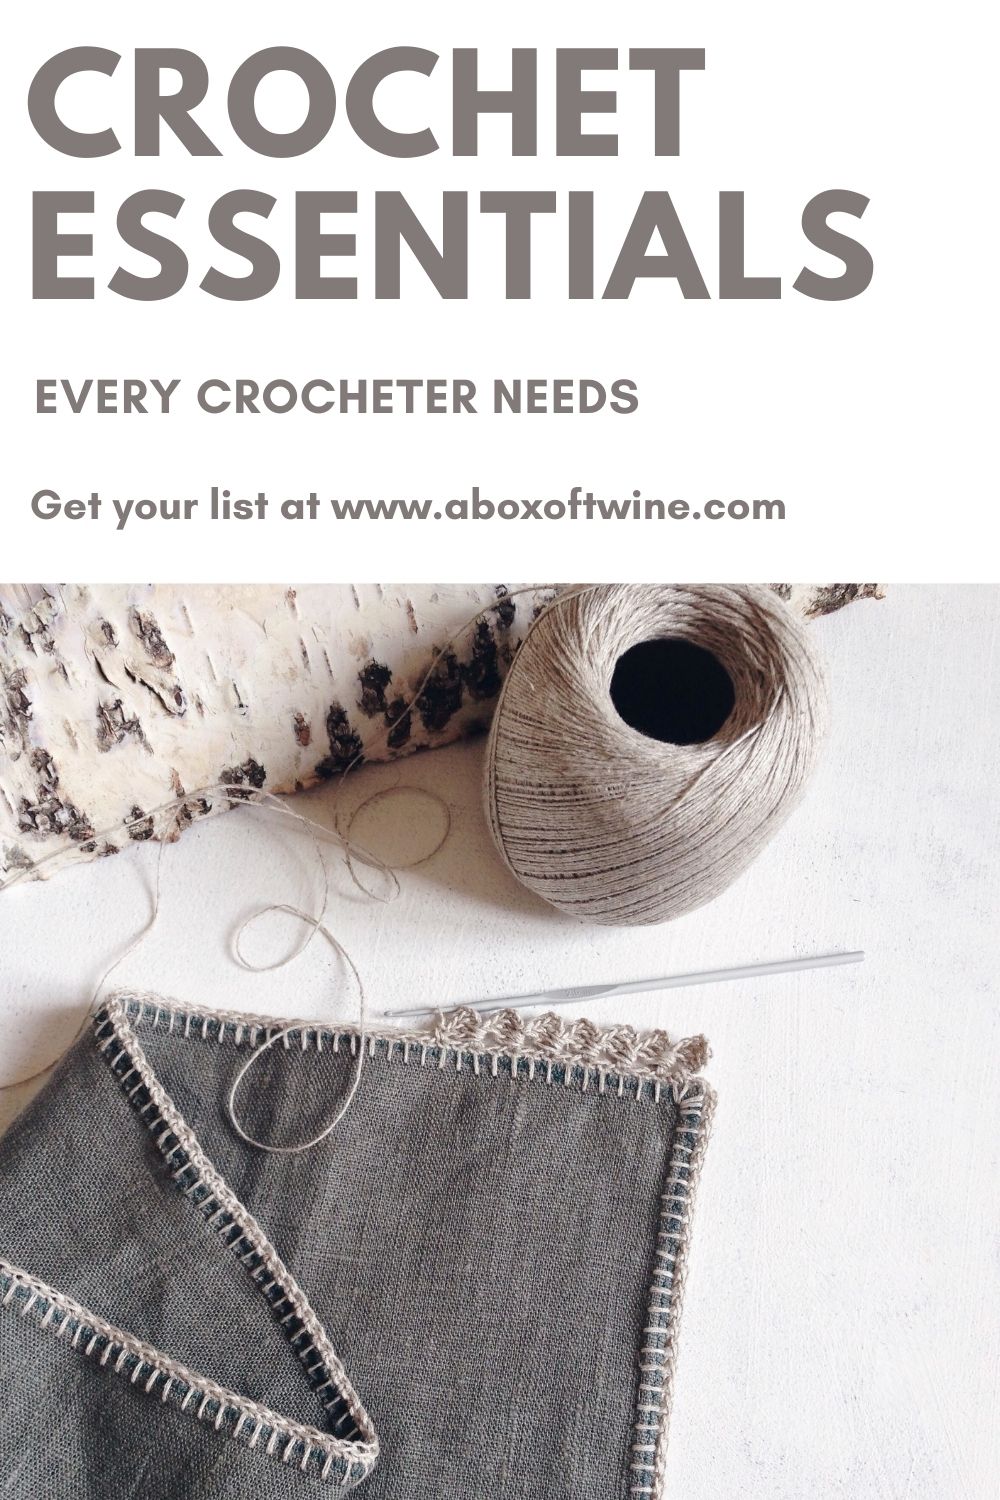 All the Essential Crochet Supplies Beginners Need